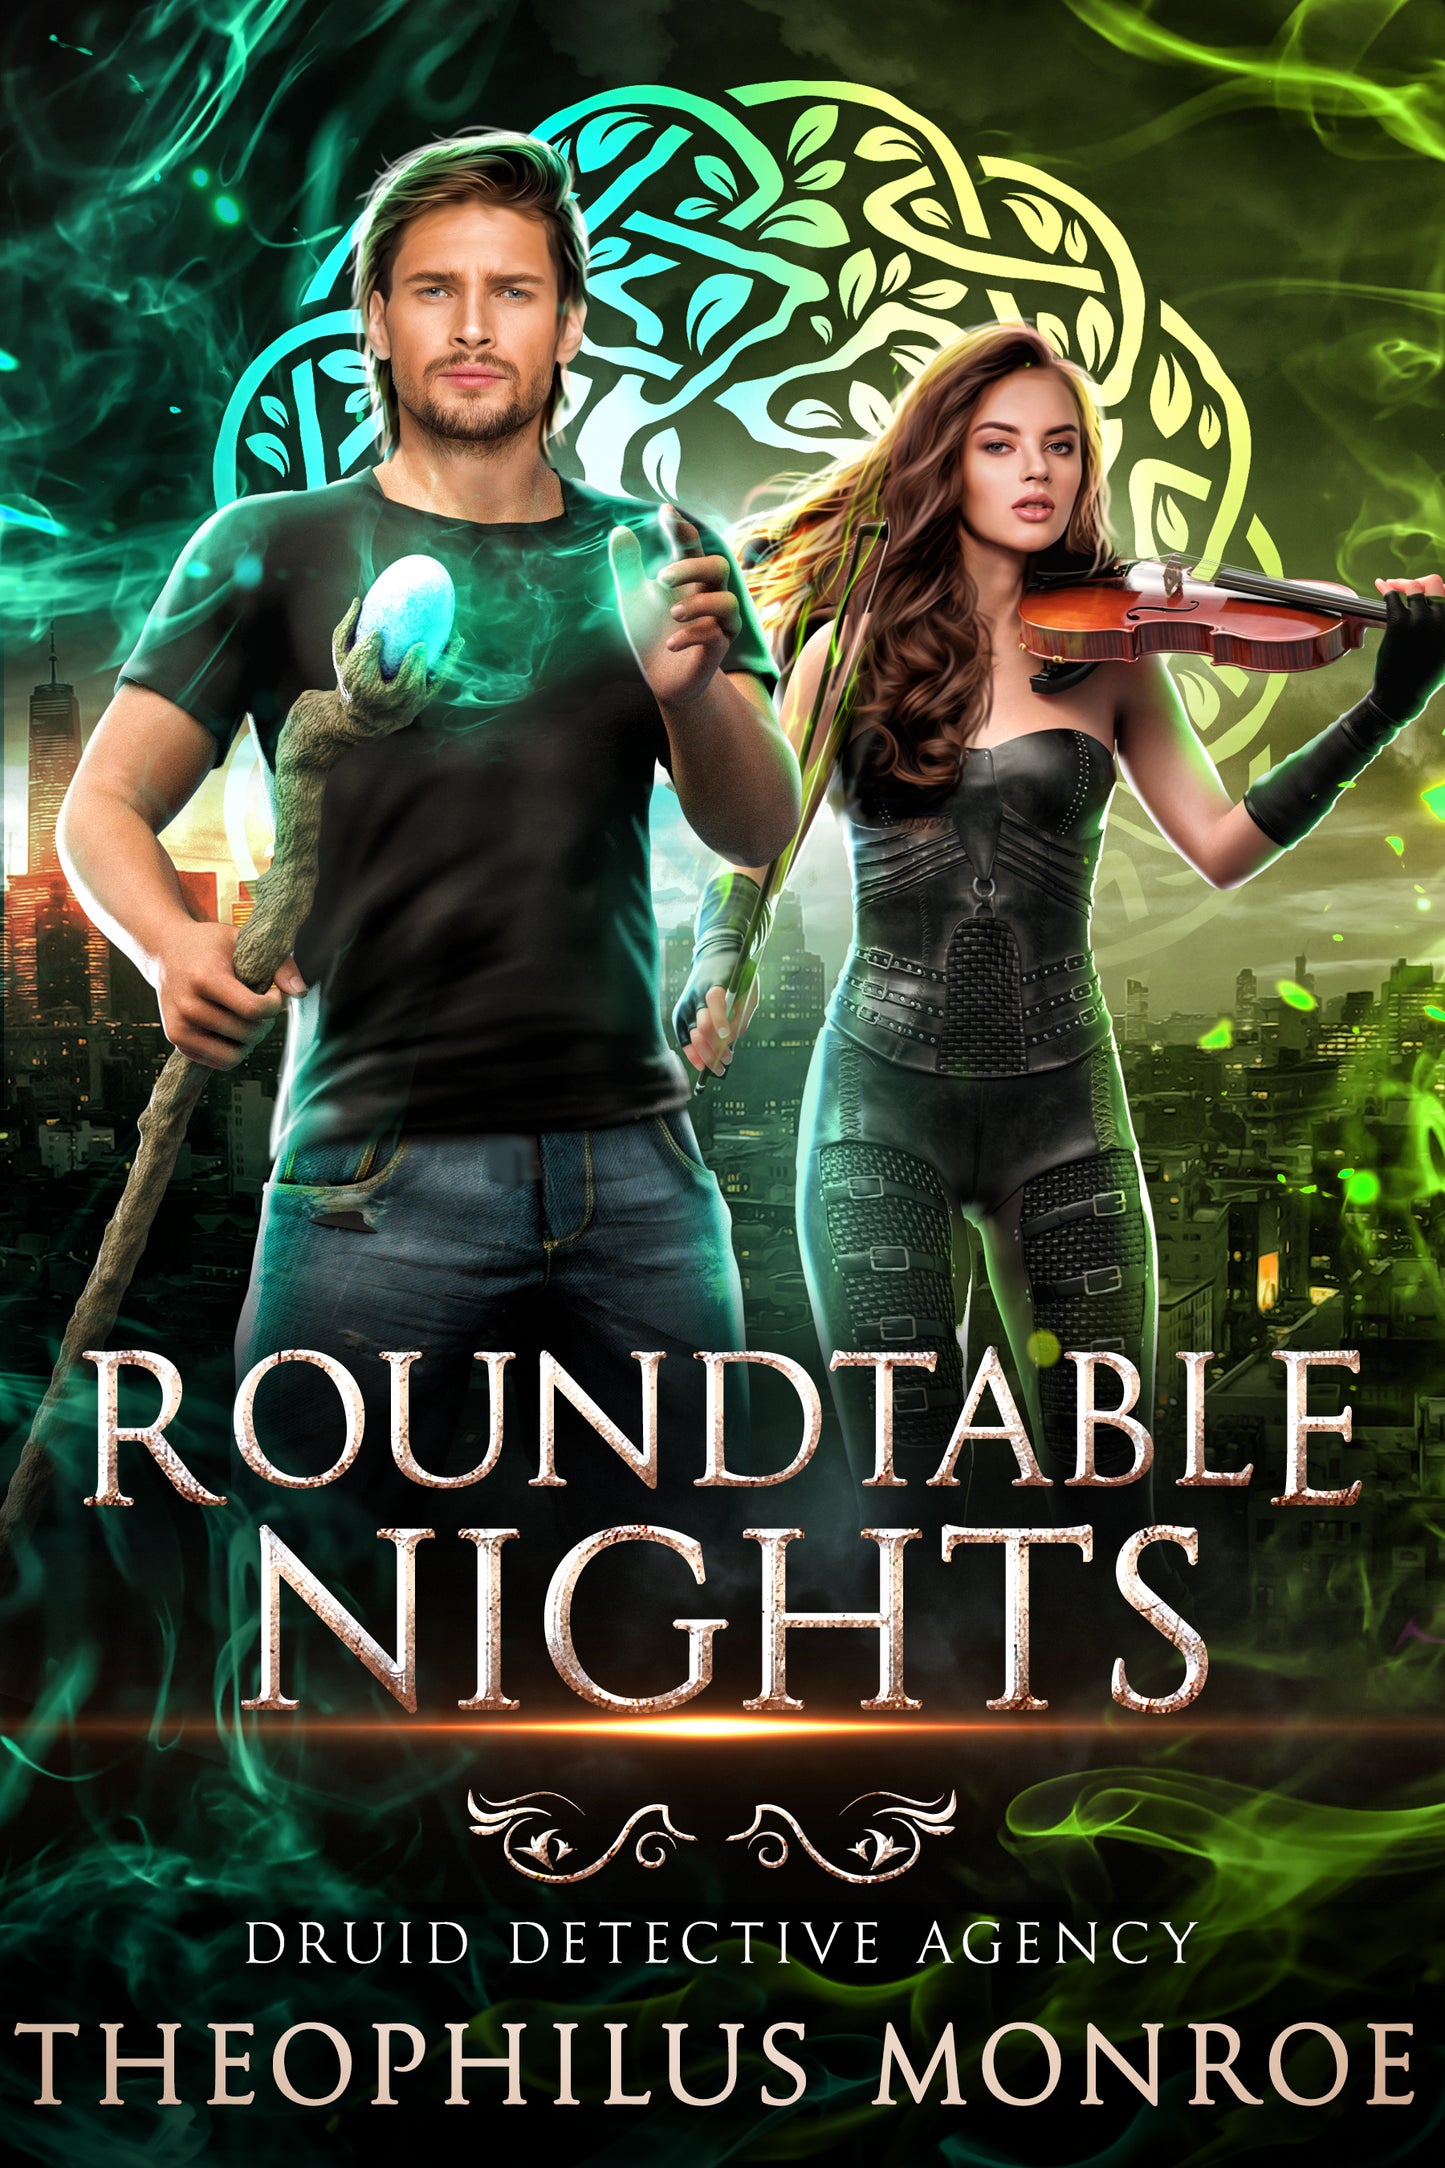 Roundtable Nights (Druid Detective Agency #2)